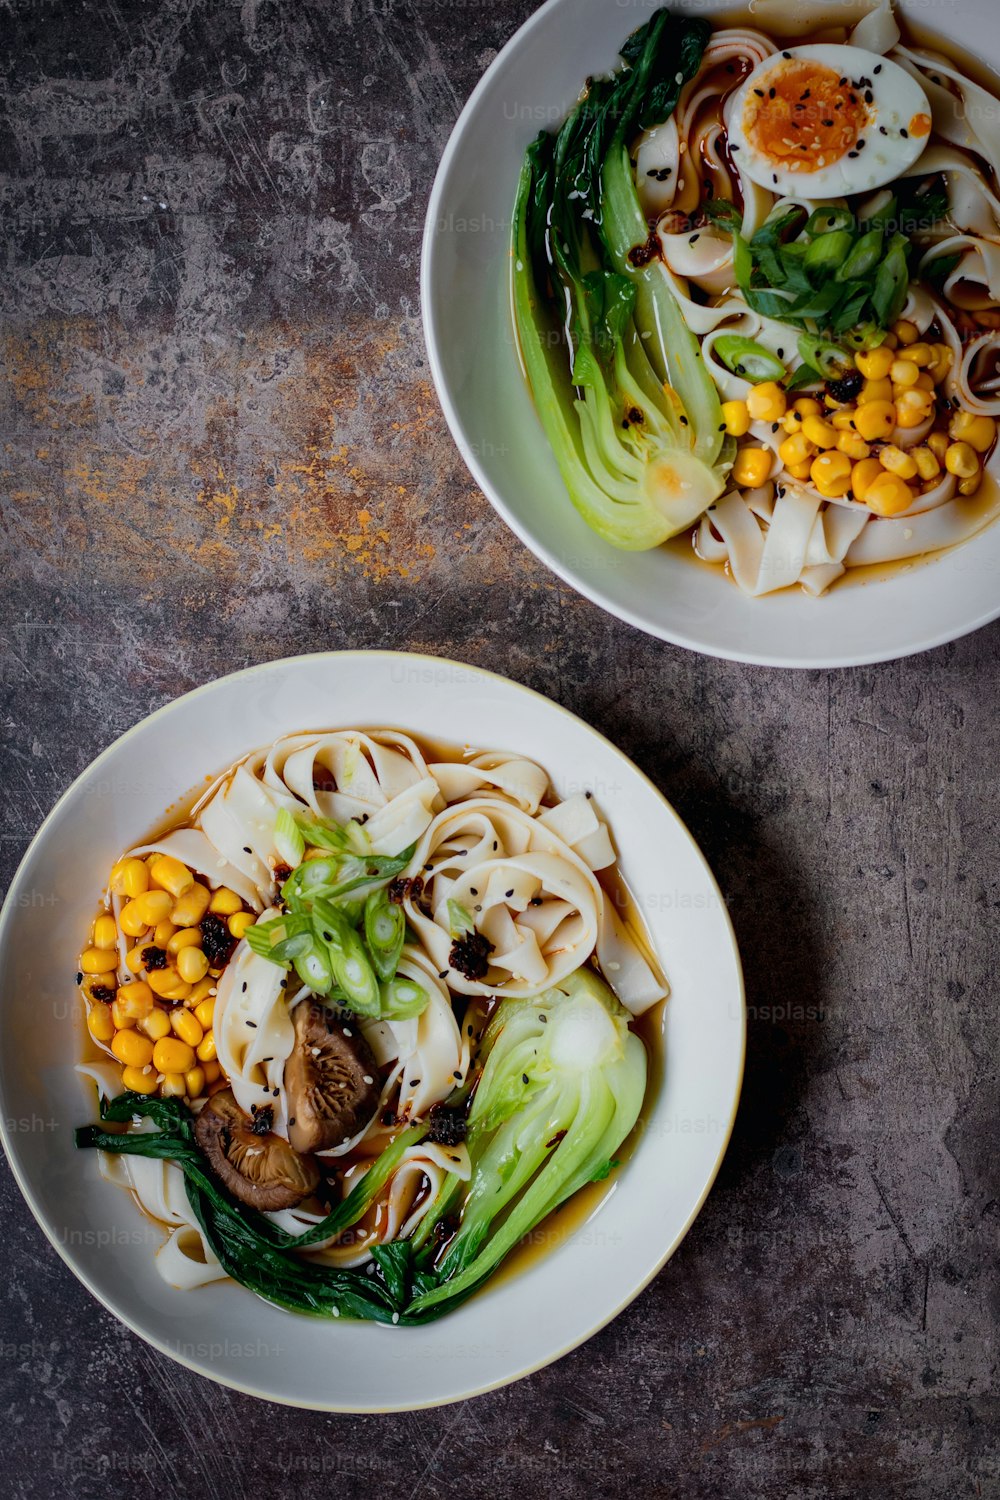 two bowls of noodles and vegetables on a table